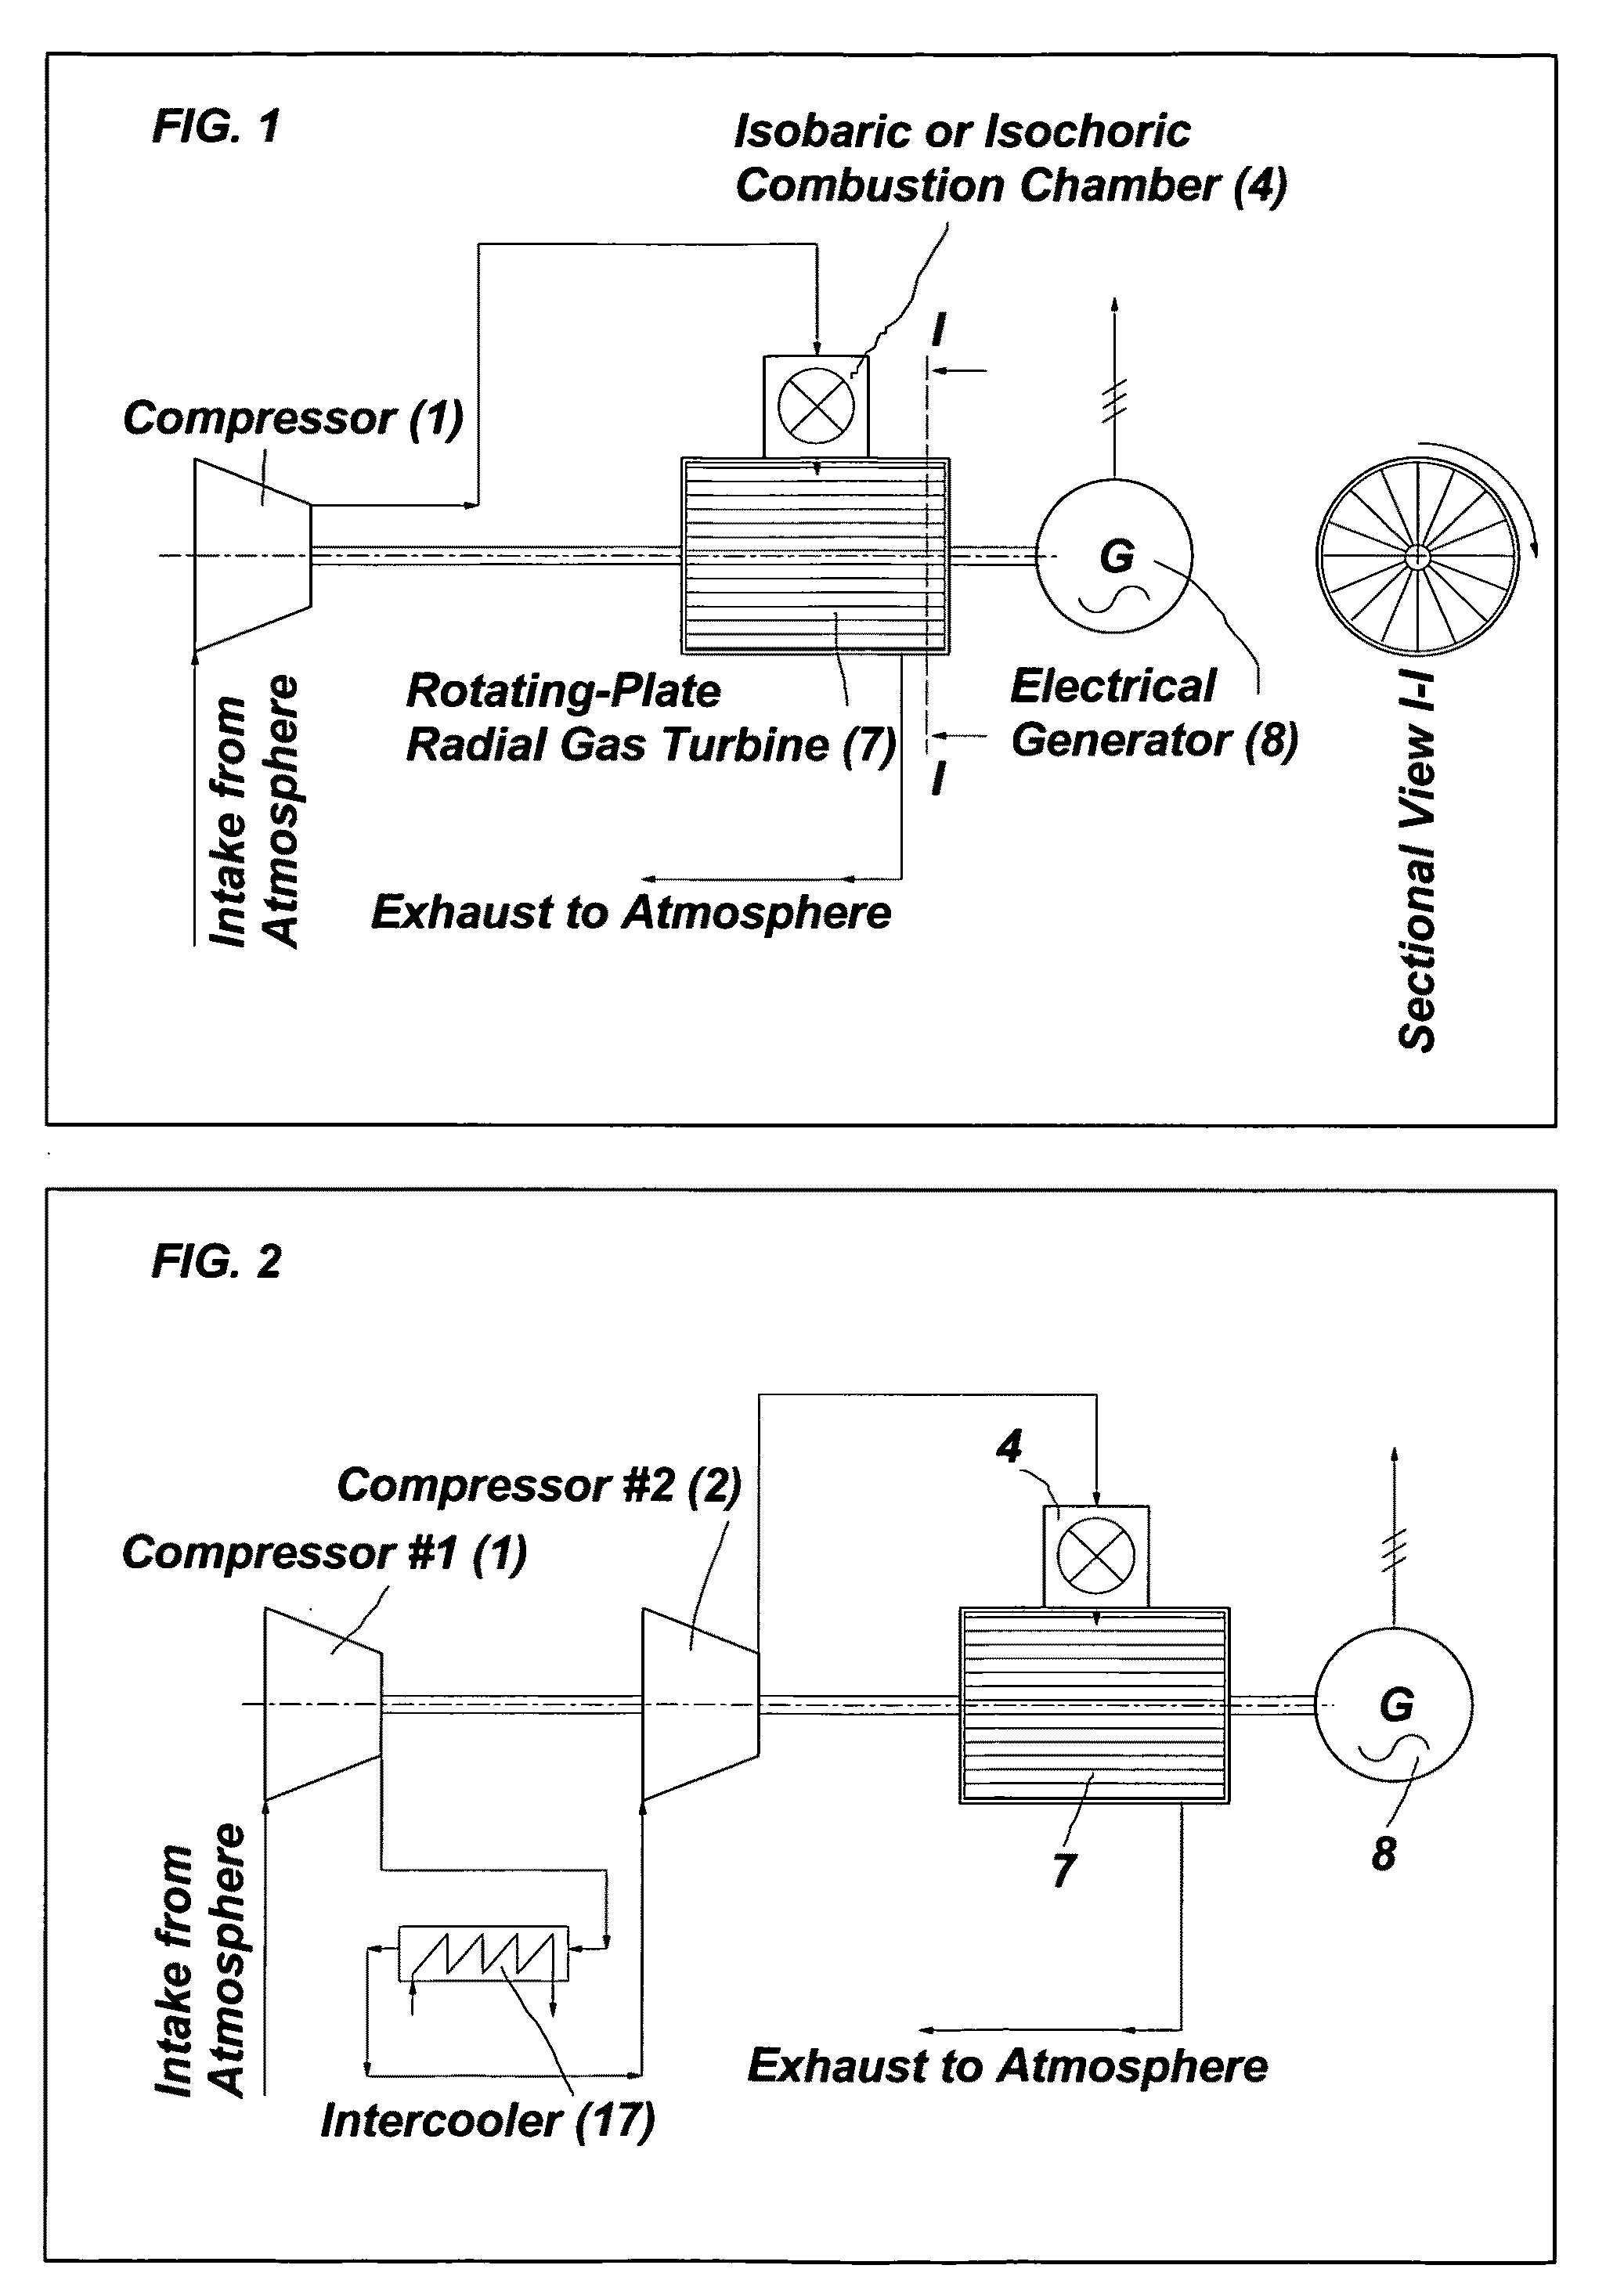 Rotating-Plate Radial Turbine in Gas-Turbine-Cycle Configurations